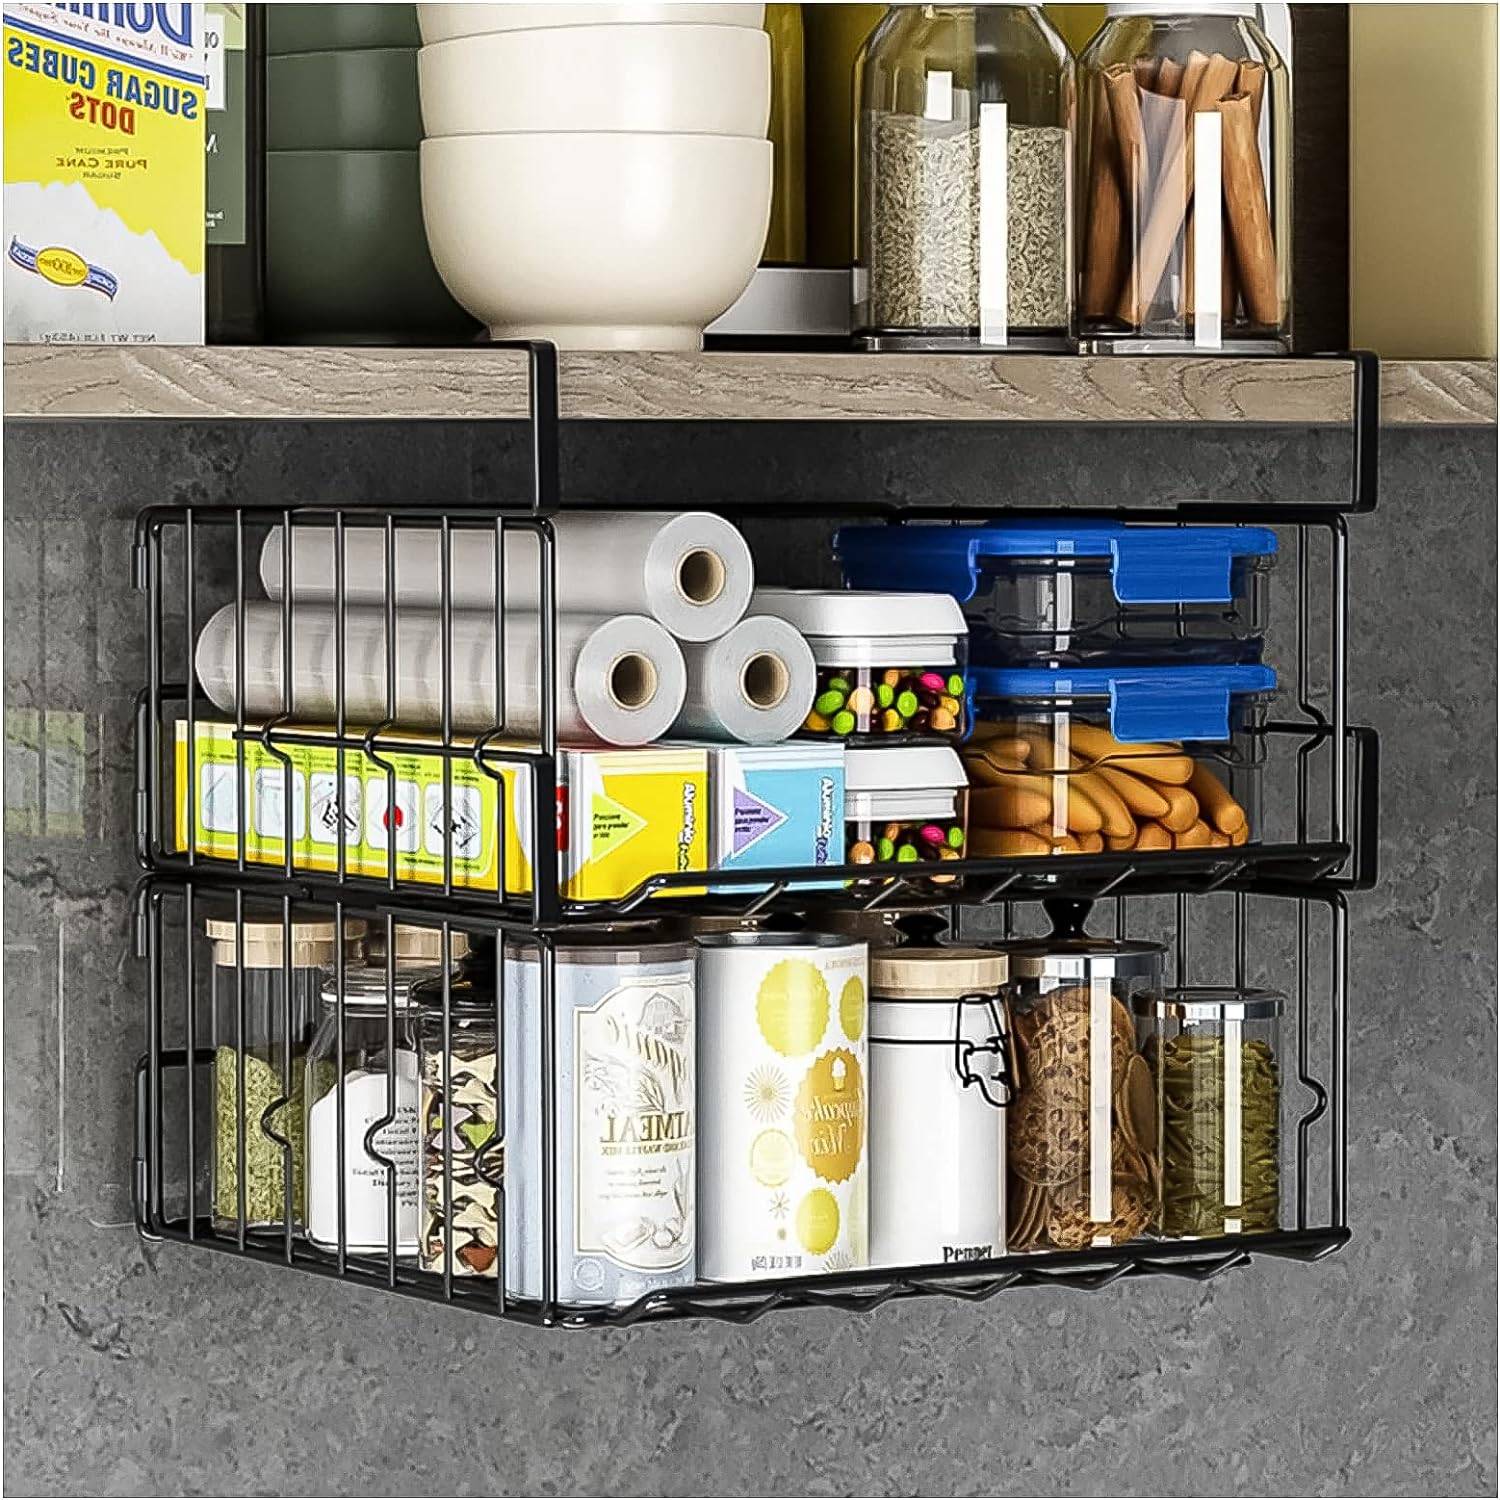 under shelf basket with pantry items.